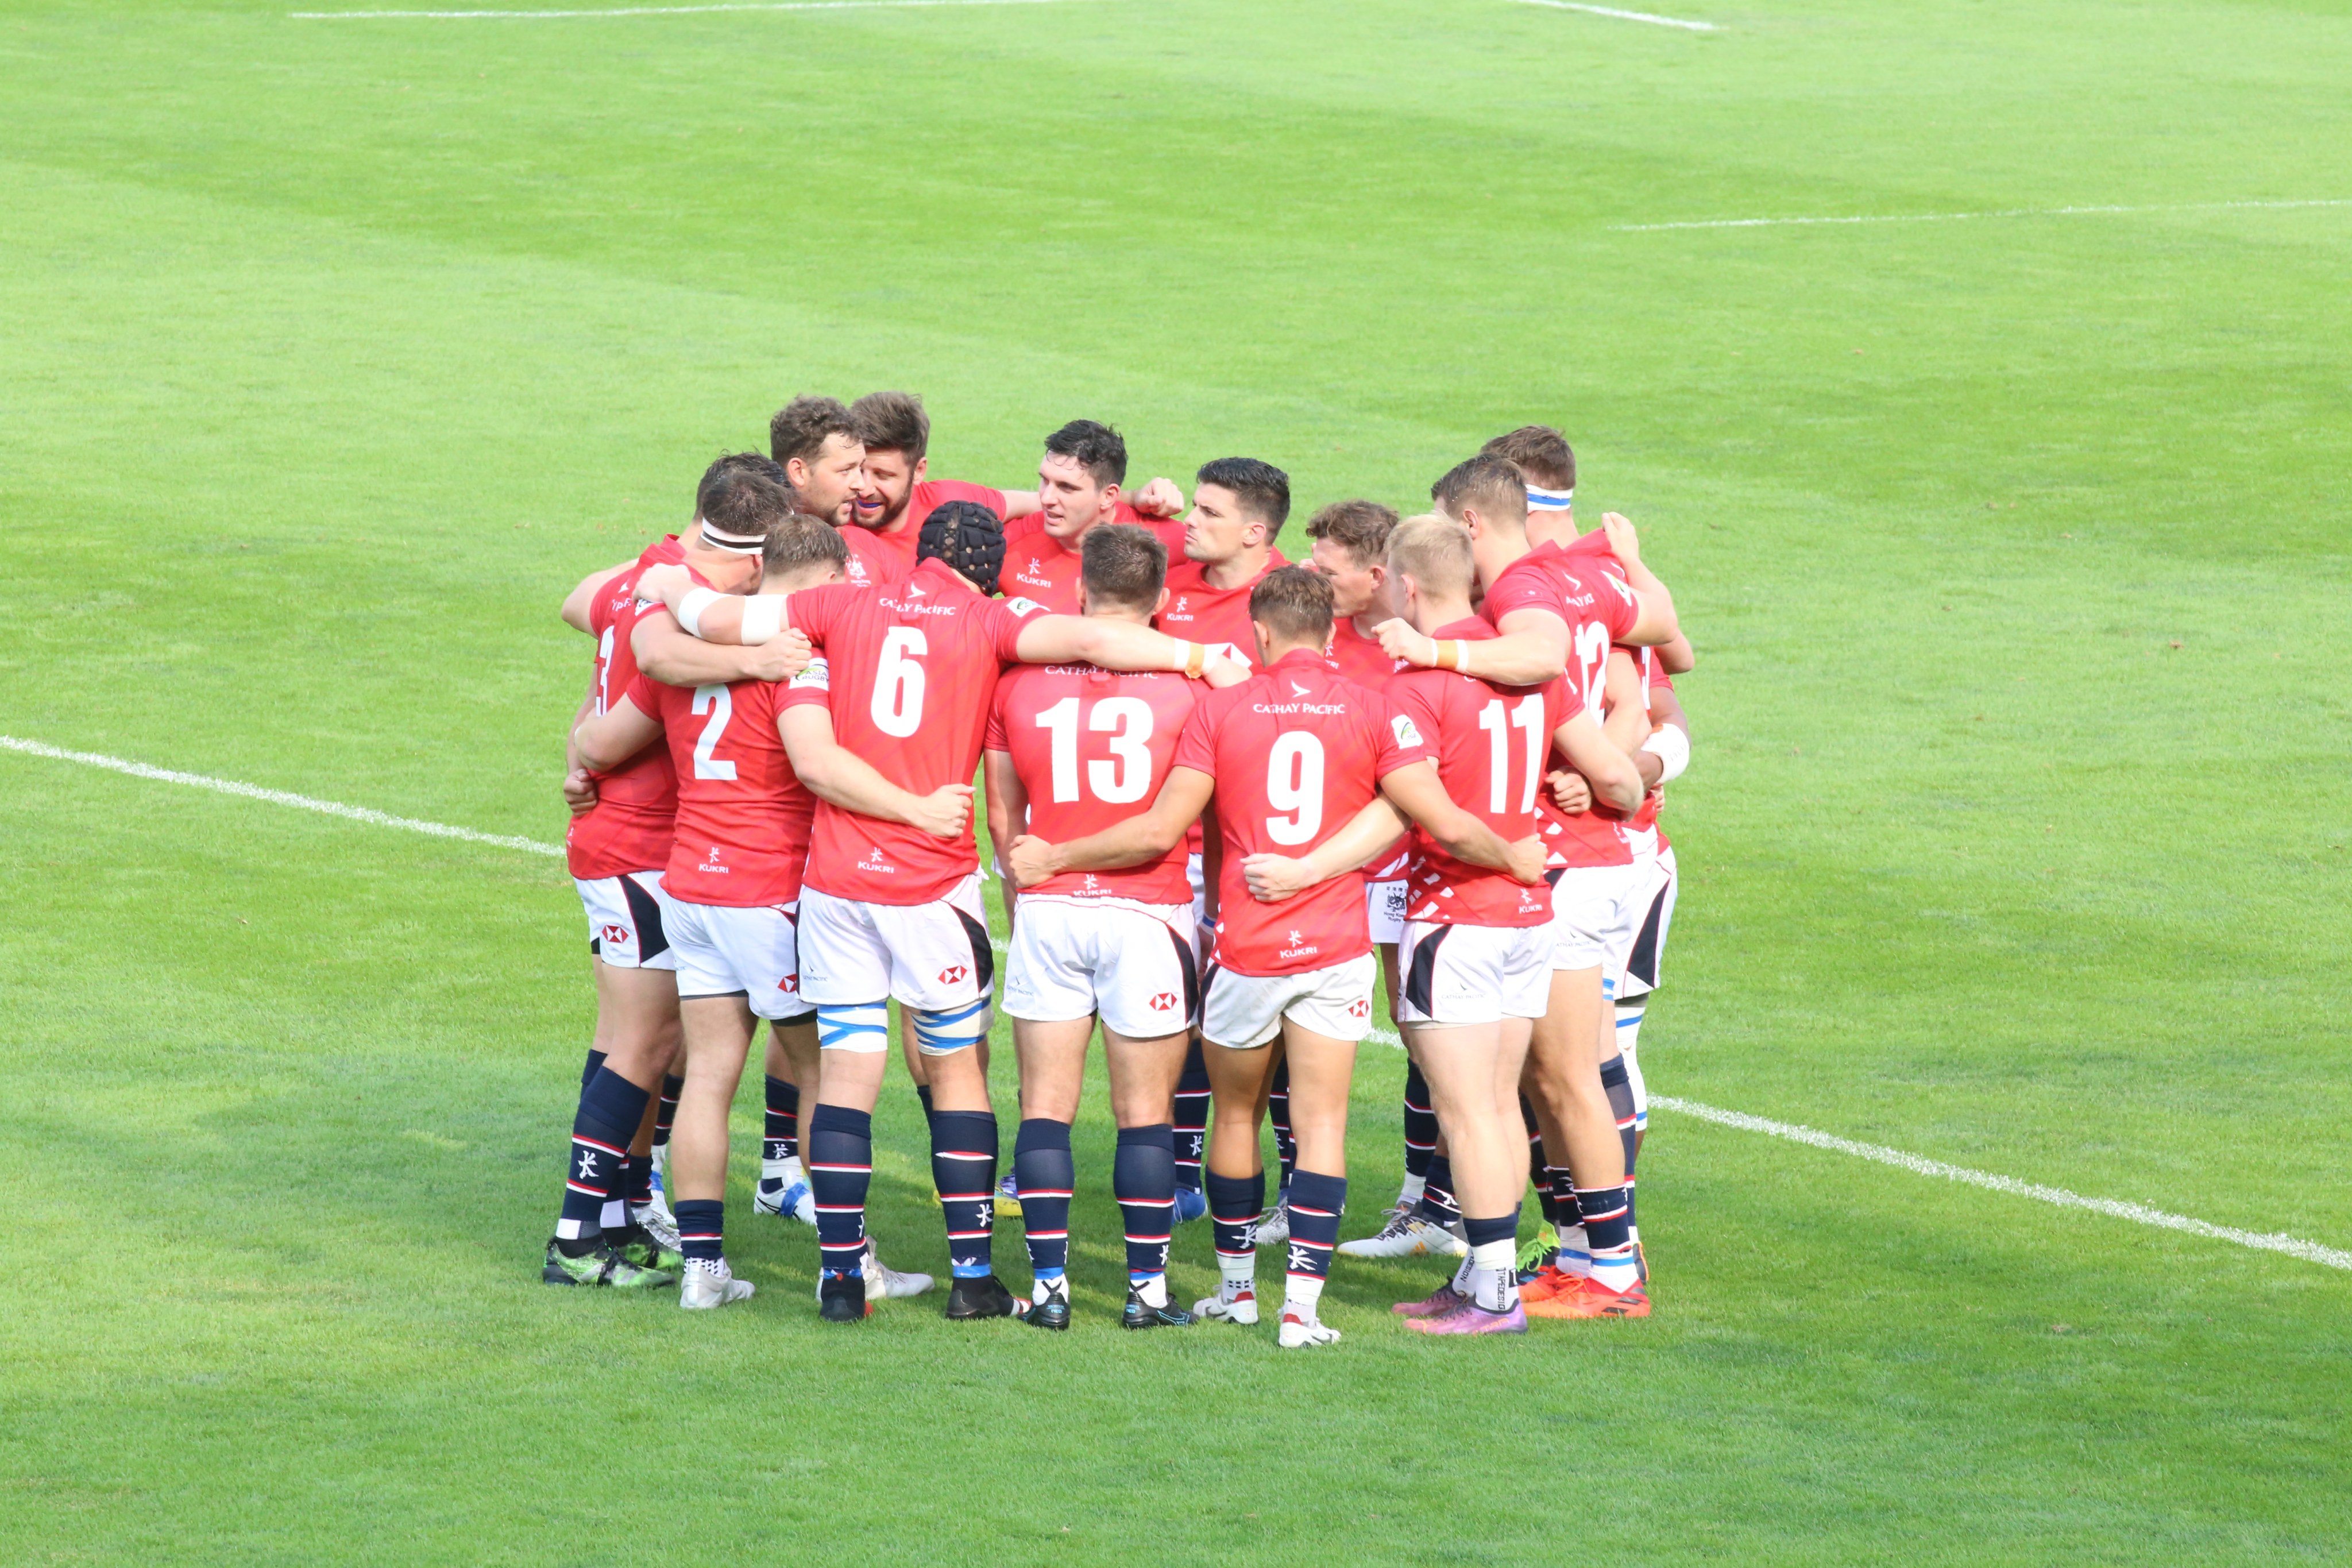 The Hong Kong team gather together for a final word before the start of their Asia Rugby Championship match against Korea. Photo: Asia Rugby 